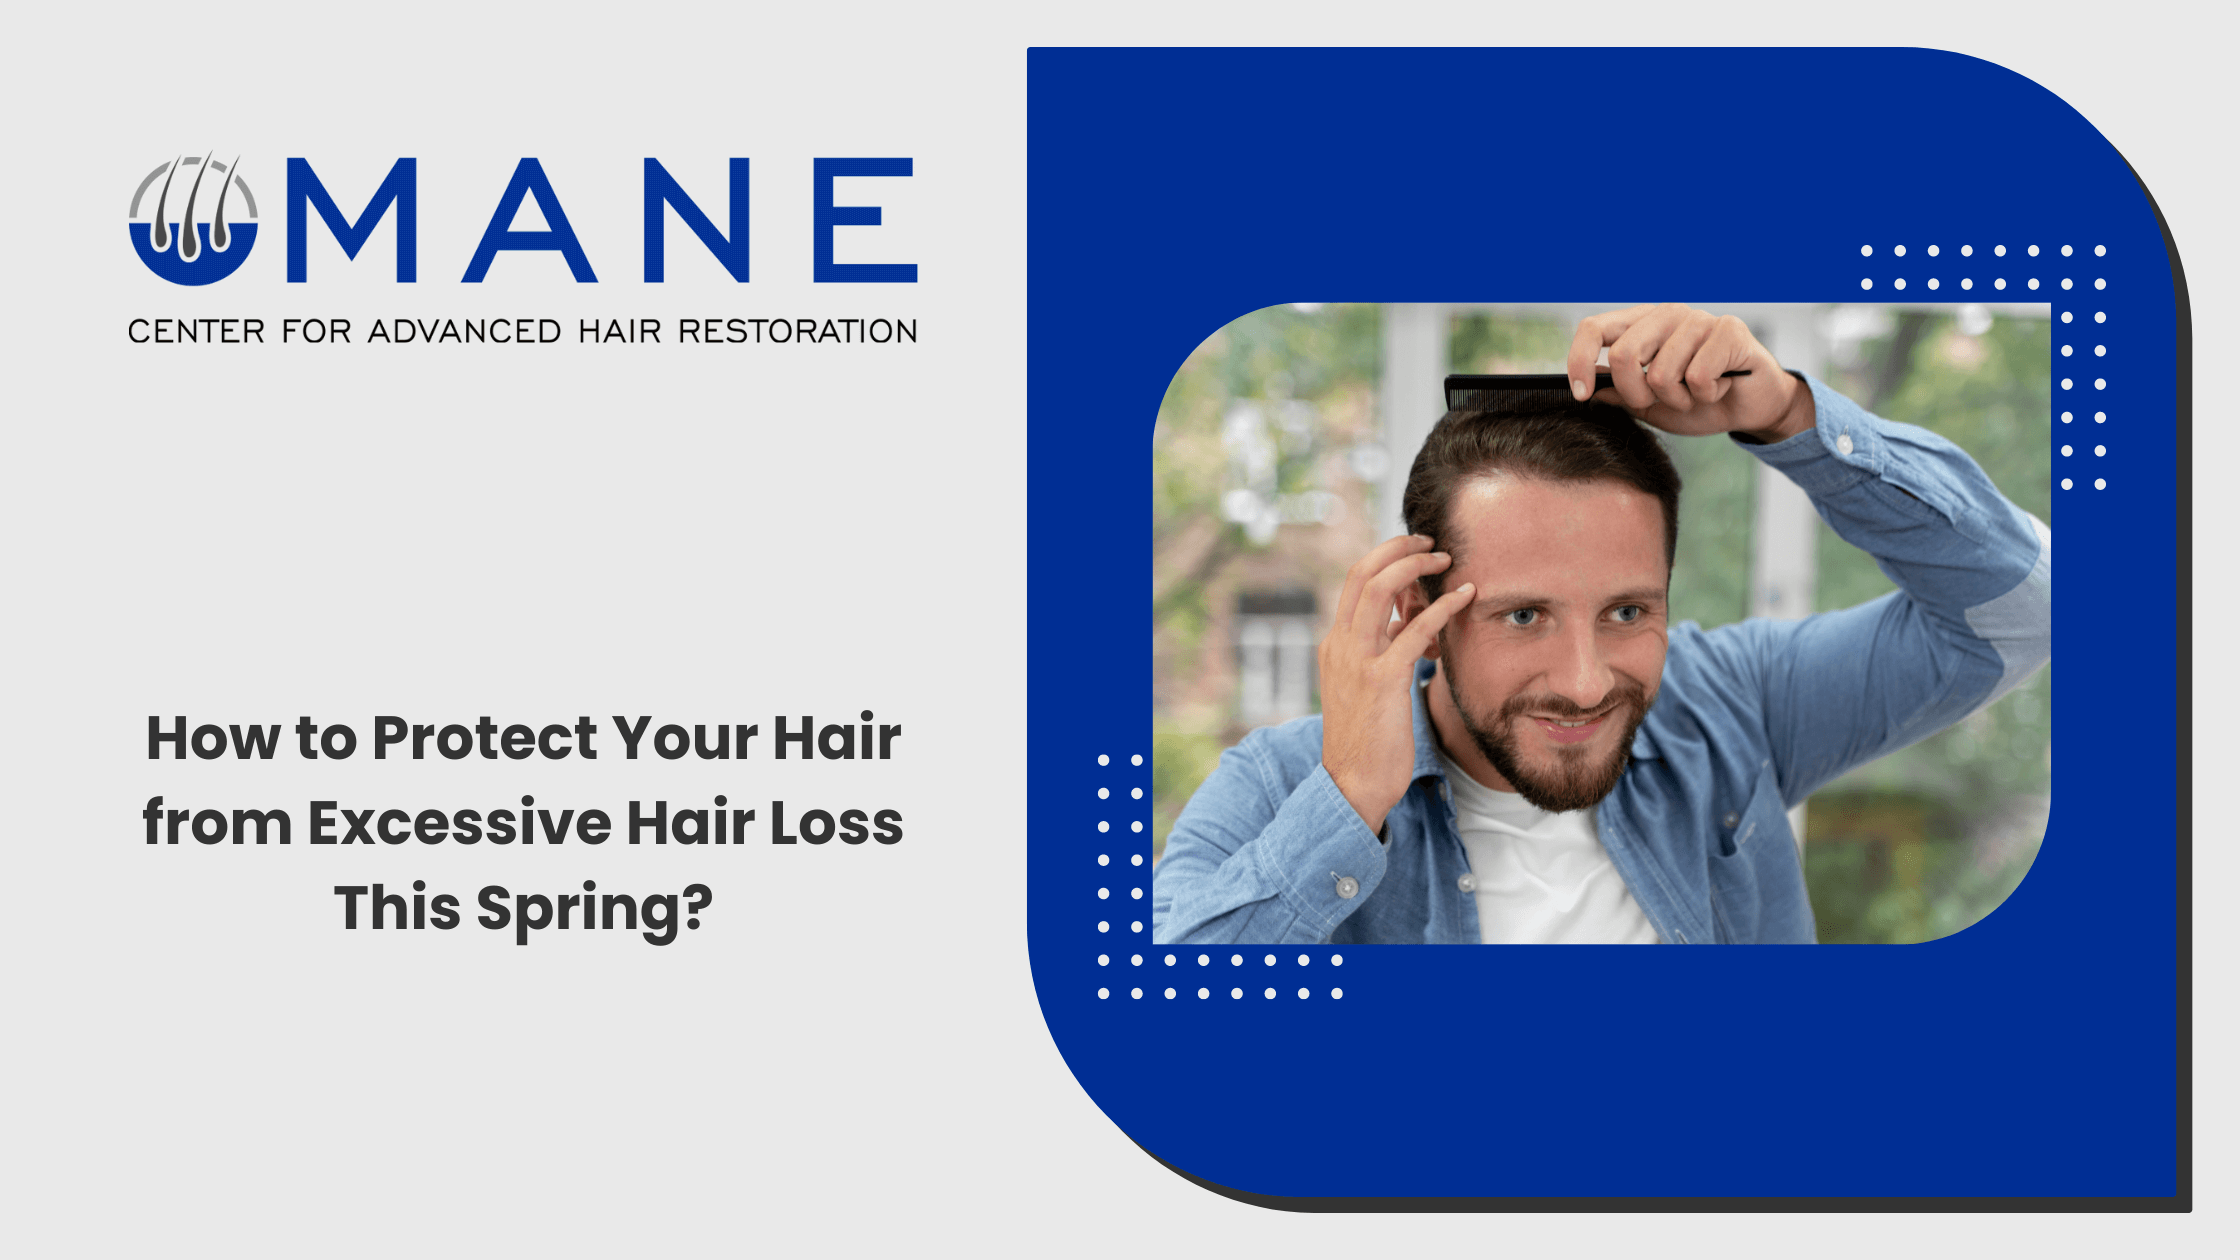 How to Protect Your Hair from Excessive Hair Loss This Spring?